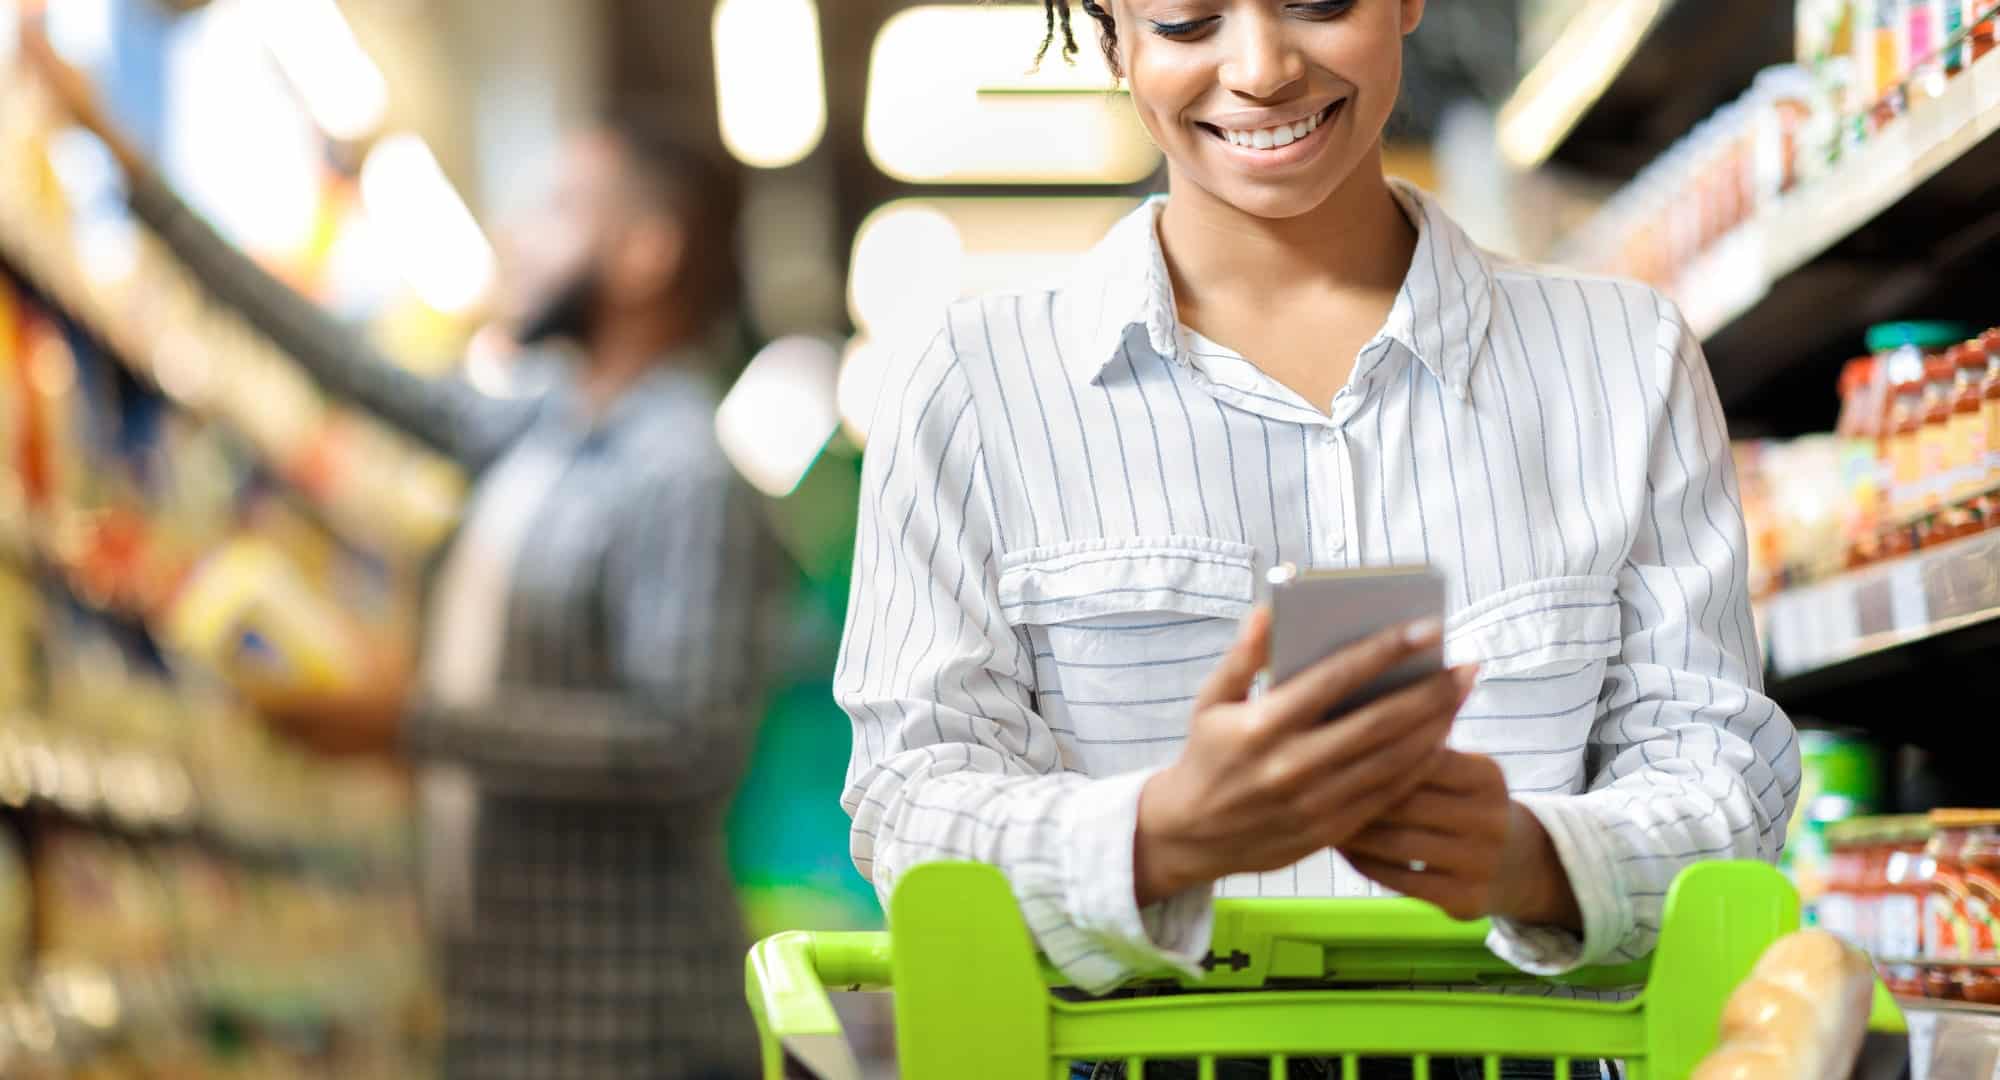 African Woman Using Grocery Shopping App On Smartphone In Supermarket